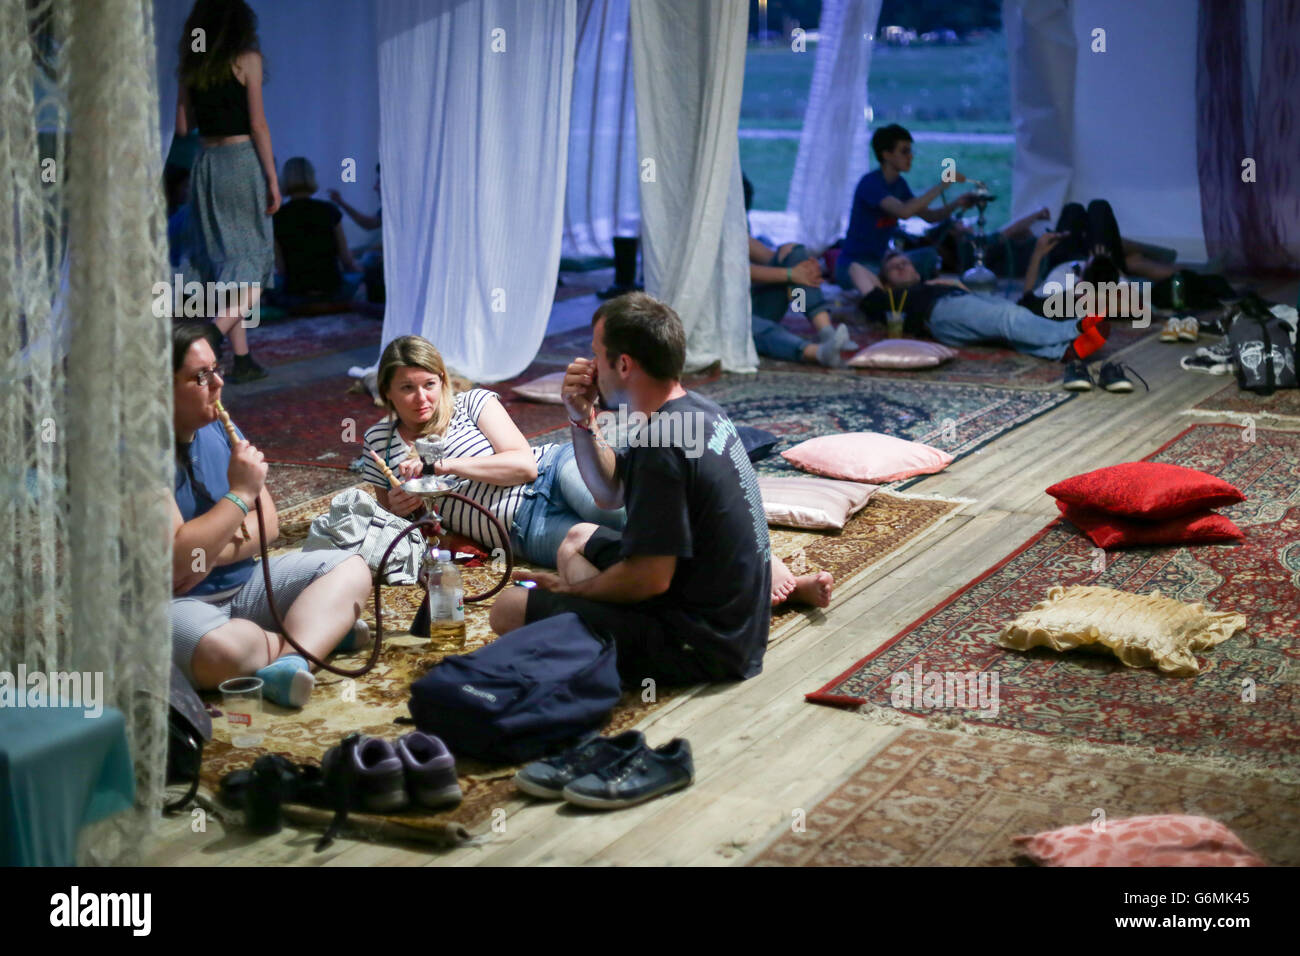 People in the Nargila Chill Out zone resting by smoking nargilas on the third day of 11th INmusic festival n Zagreb, Croatia. Stock Photo